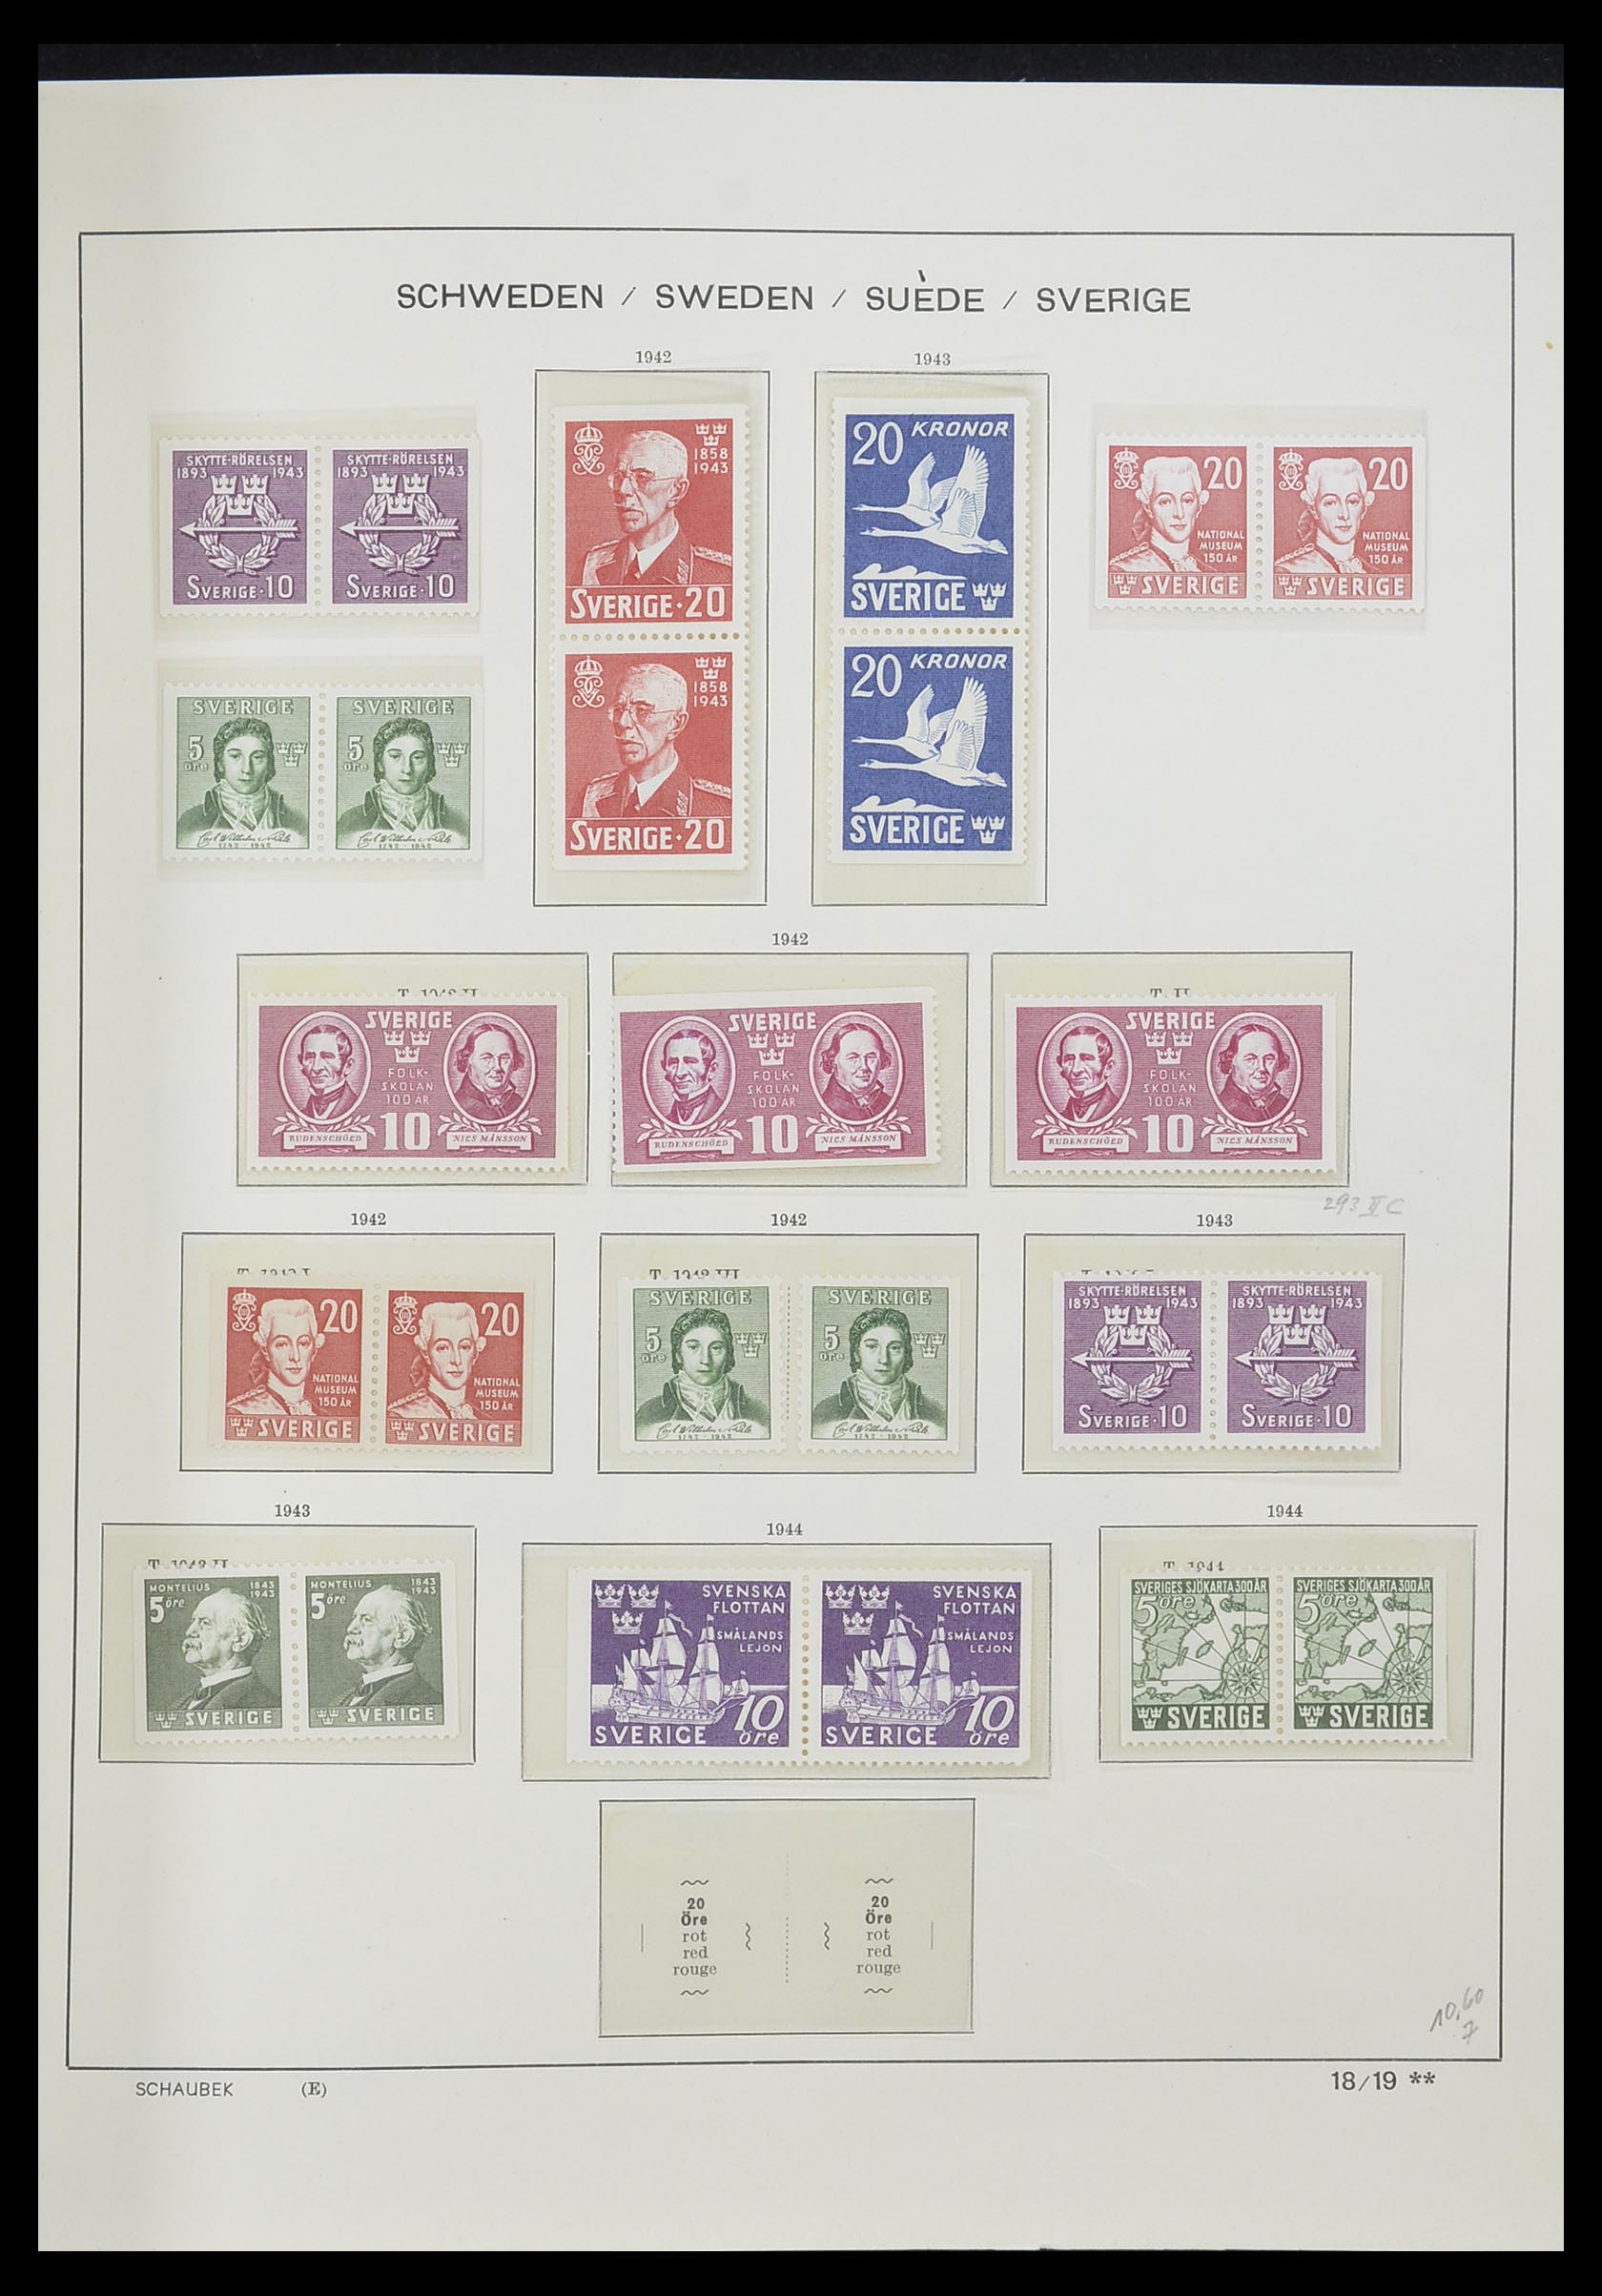 33293 032 - Stamp collection 33293 Sweden 1855-1996.